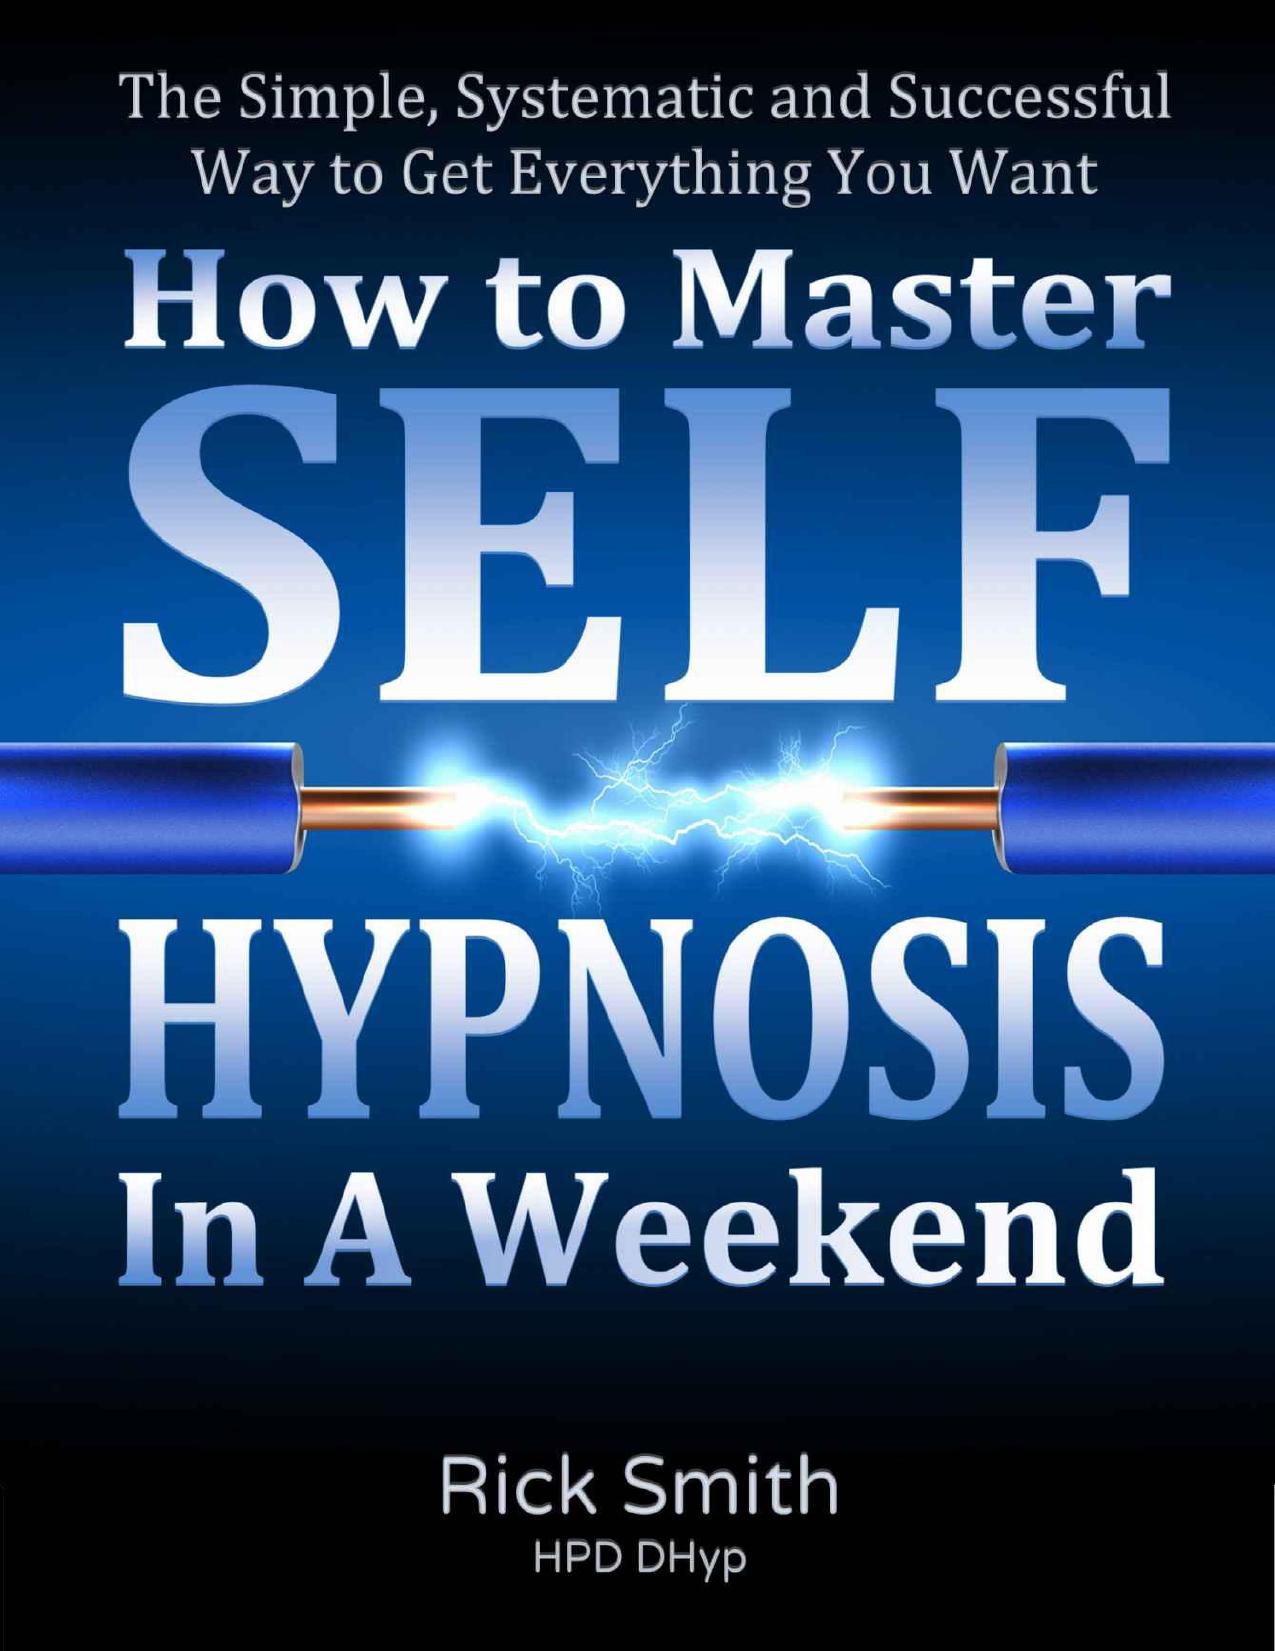 How To Master Self-Hypnosis In A Weekend - The Simple, Systematic and Successful Way to Get Everything You Want by Rick Smith